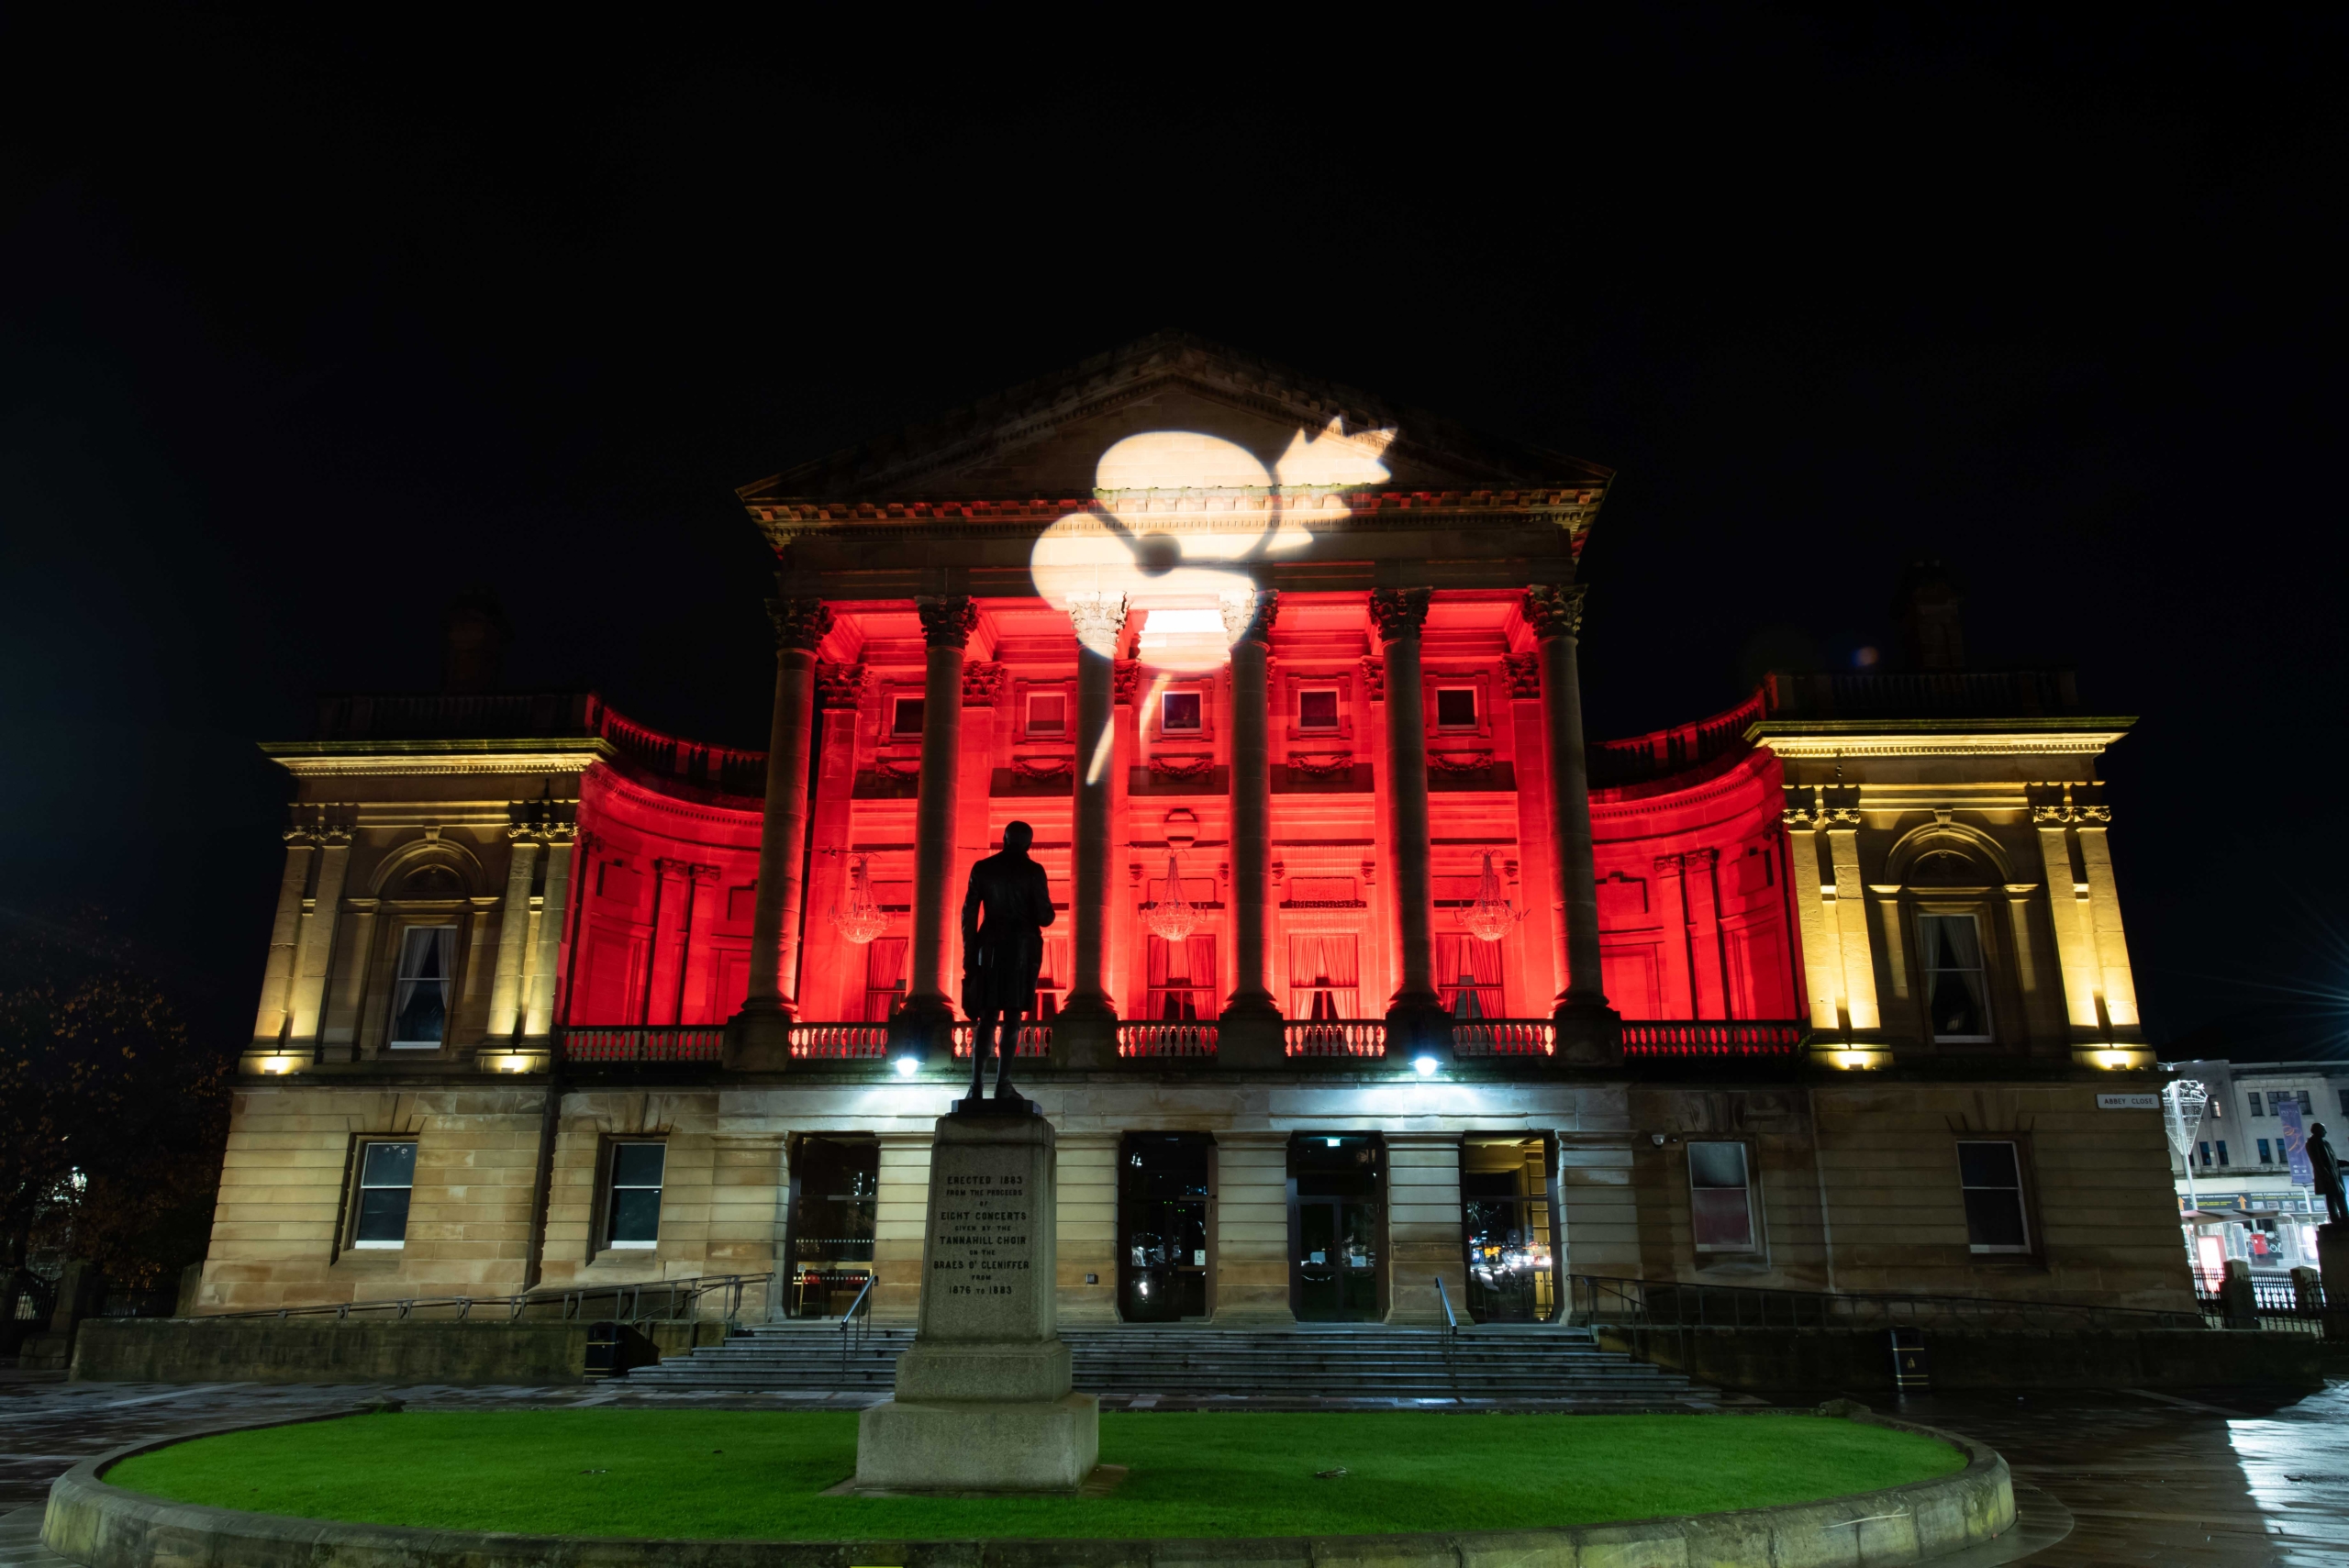 Paisley Town Hall lit up in red